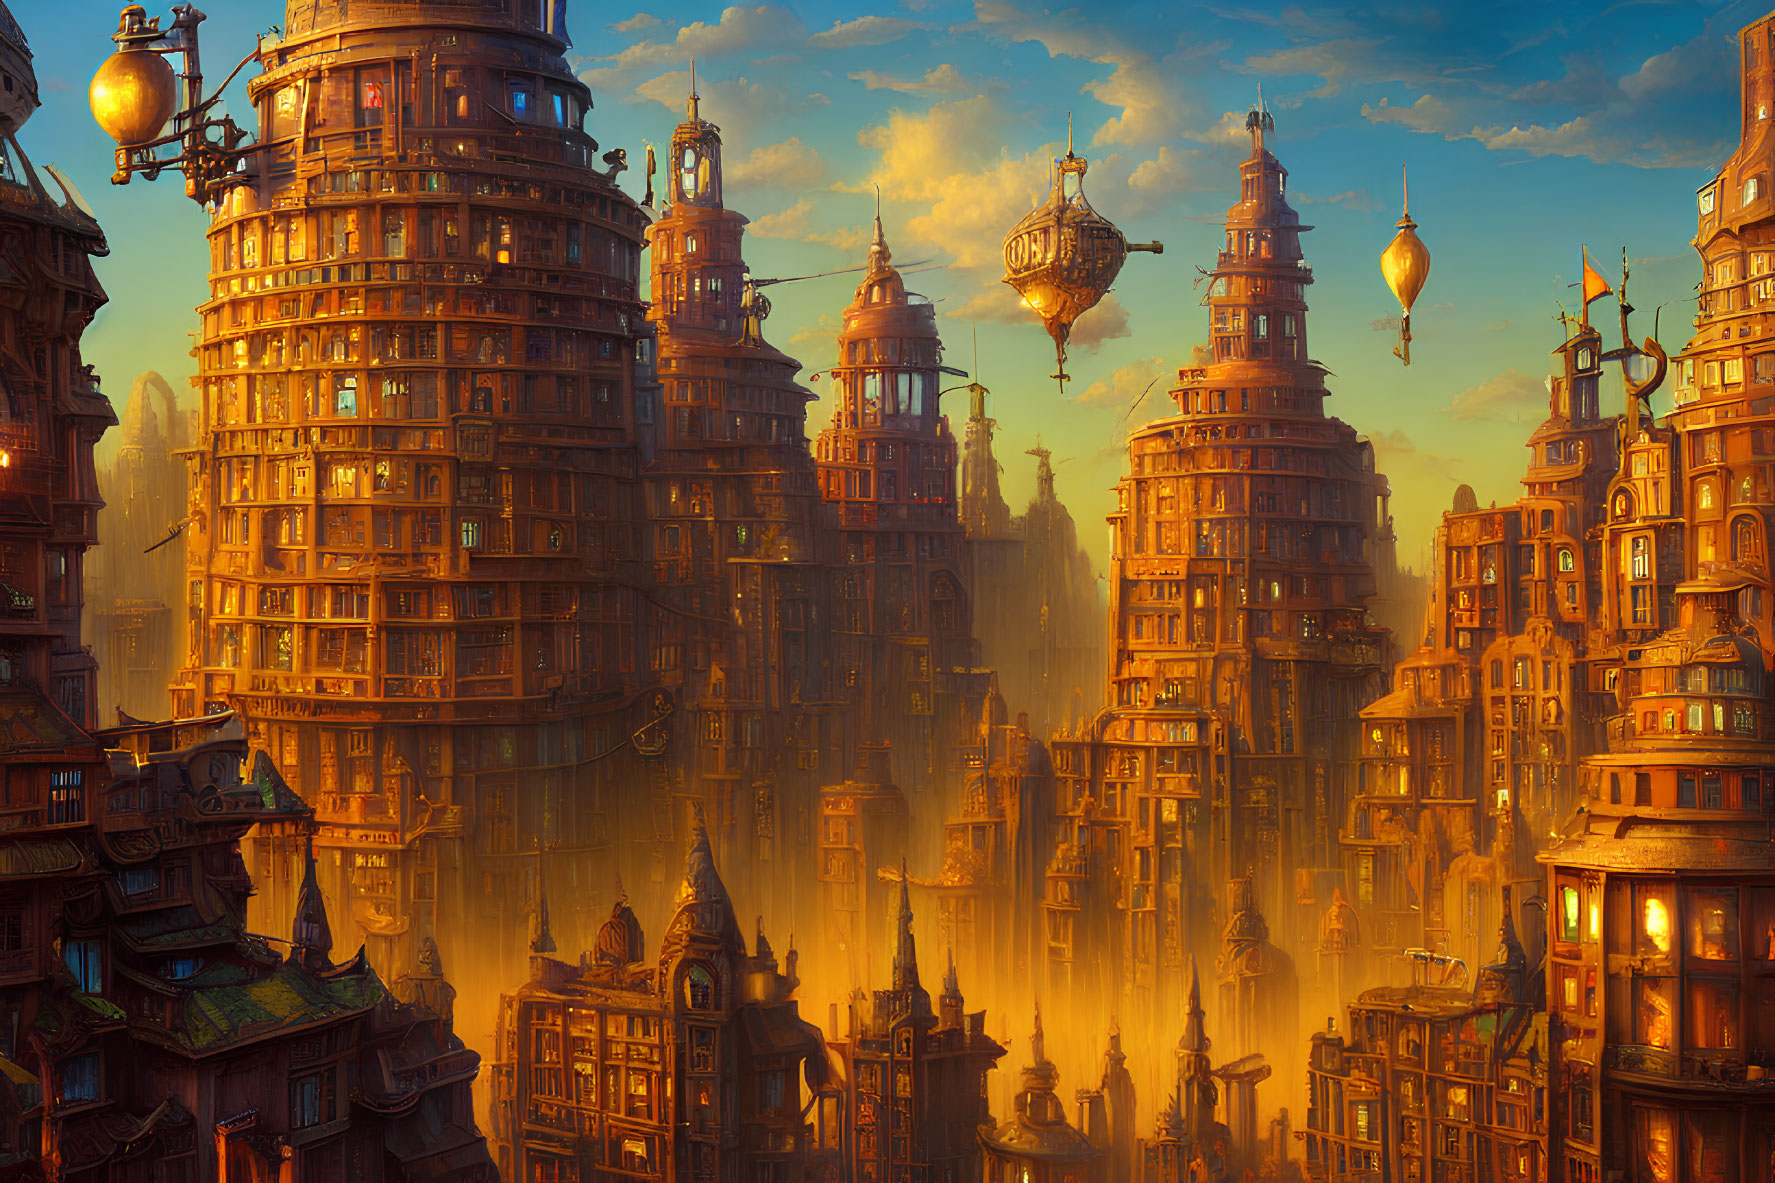 Steampunk-style cityscape with airships at sunset